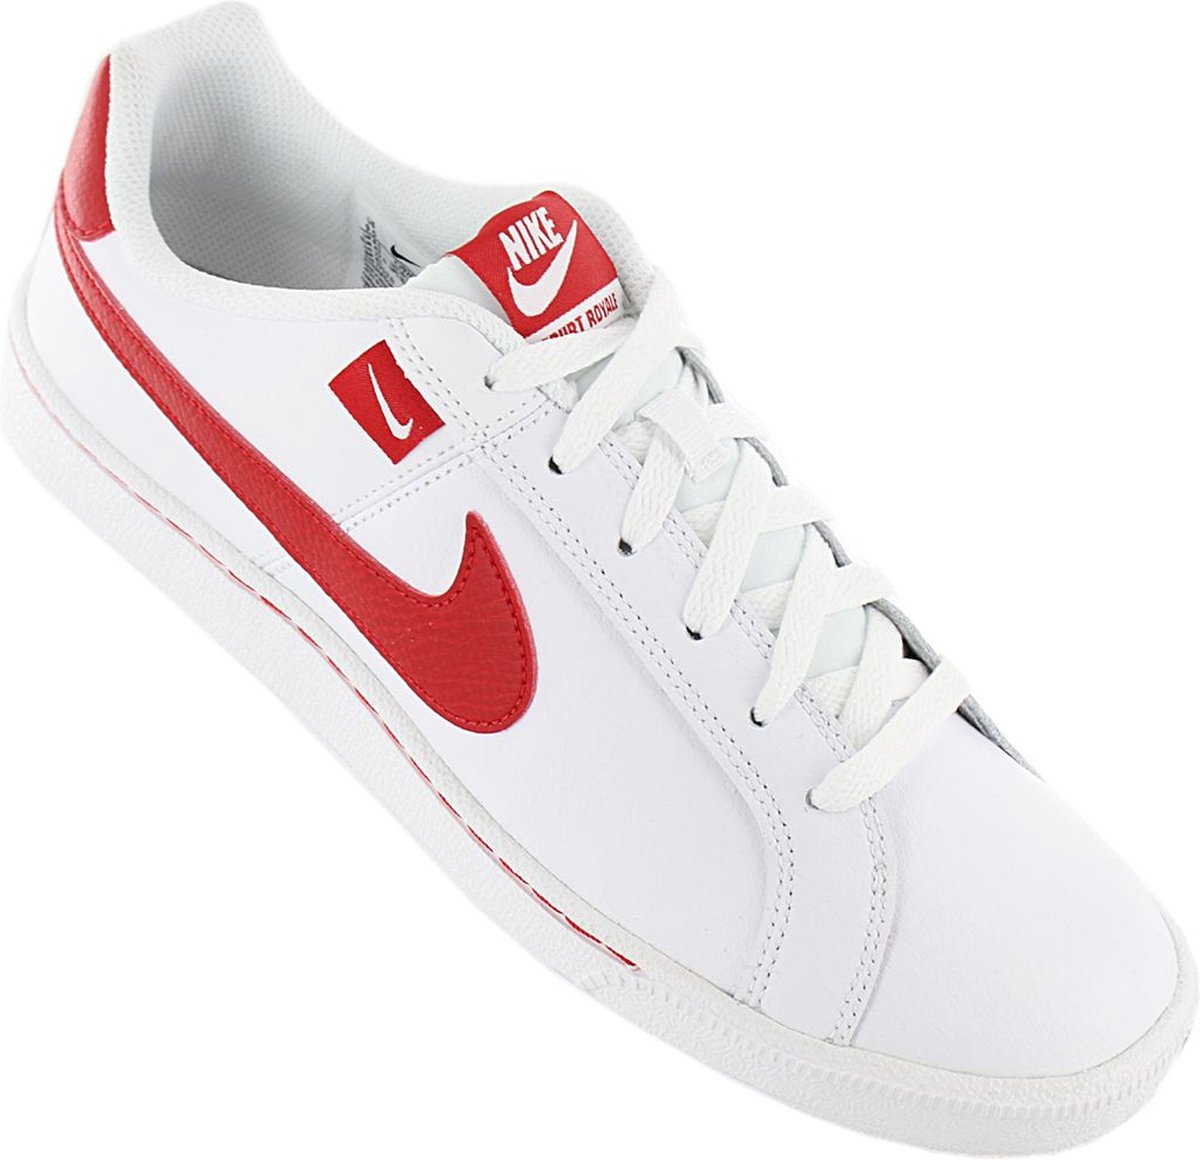 Nike Nike Court Royale Sneakers - Maat 41 - Mannen - wit,rood | bol.com